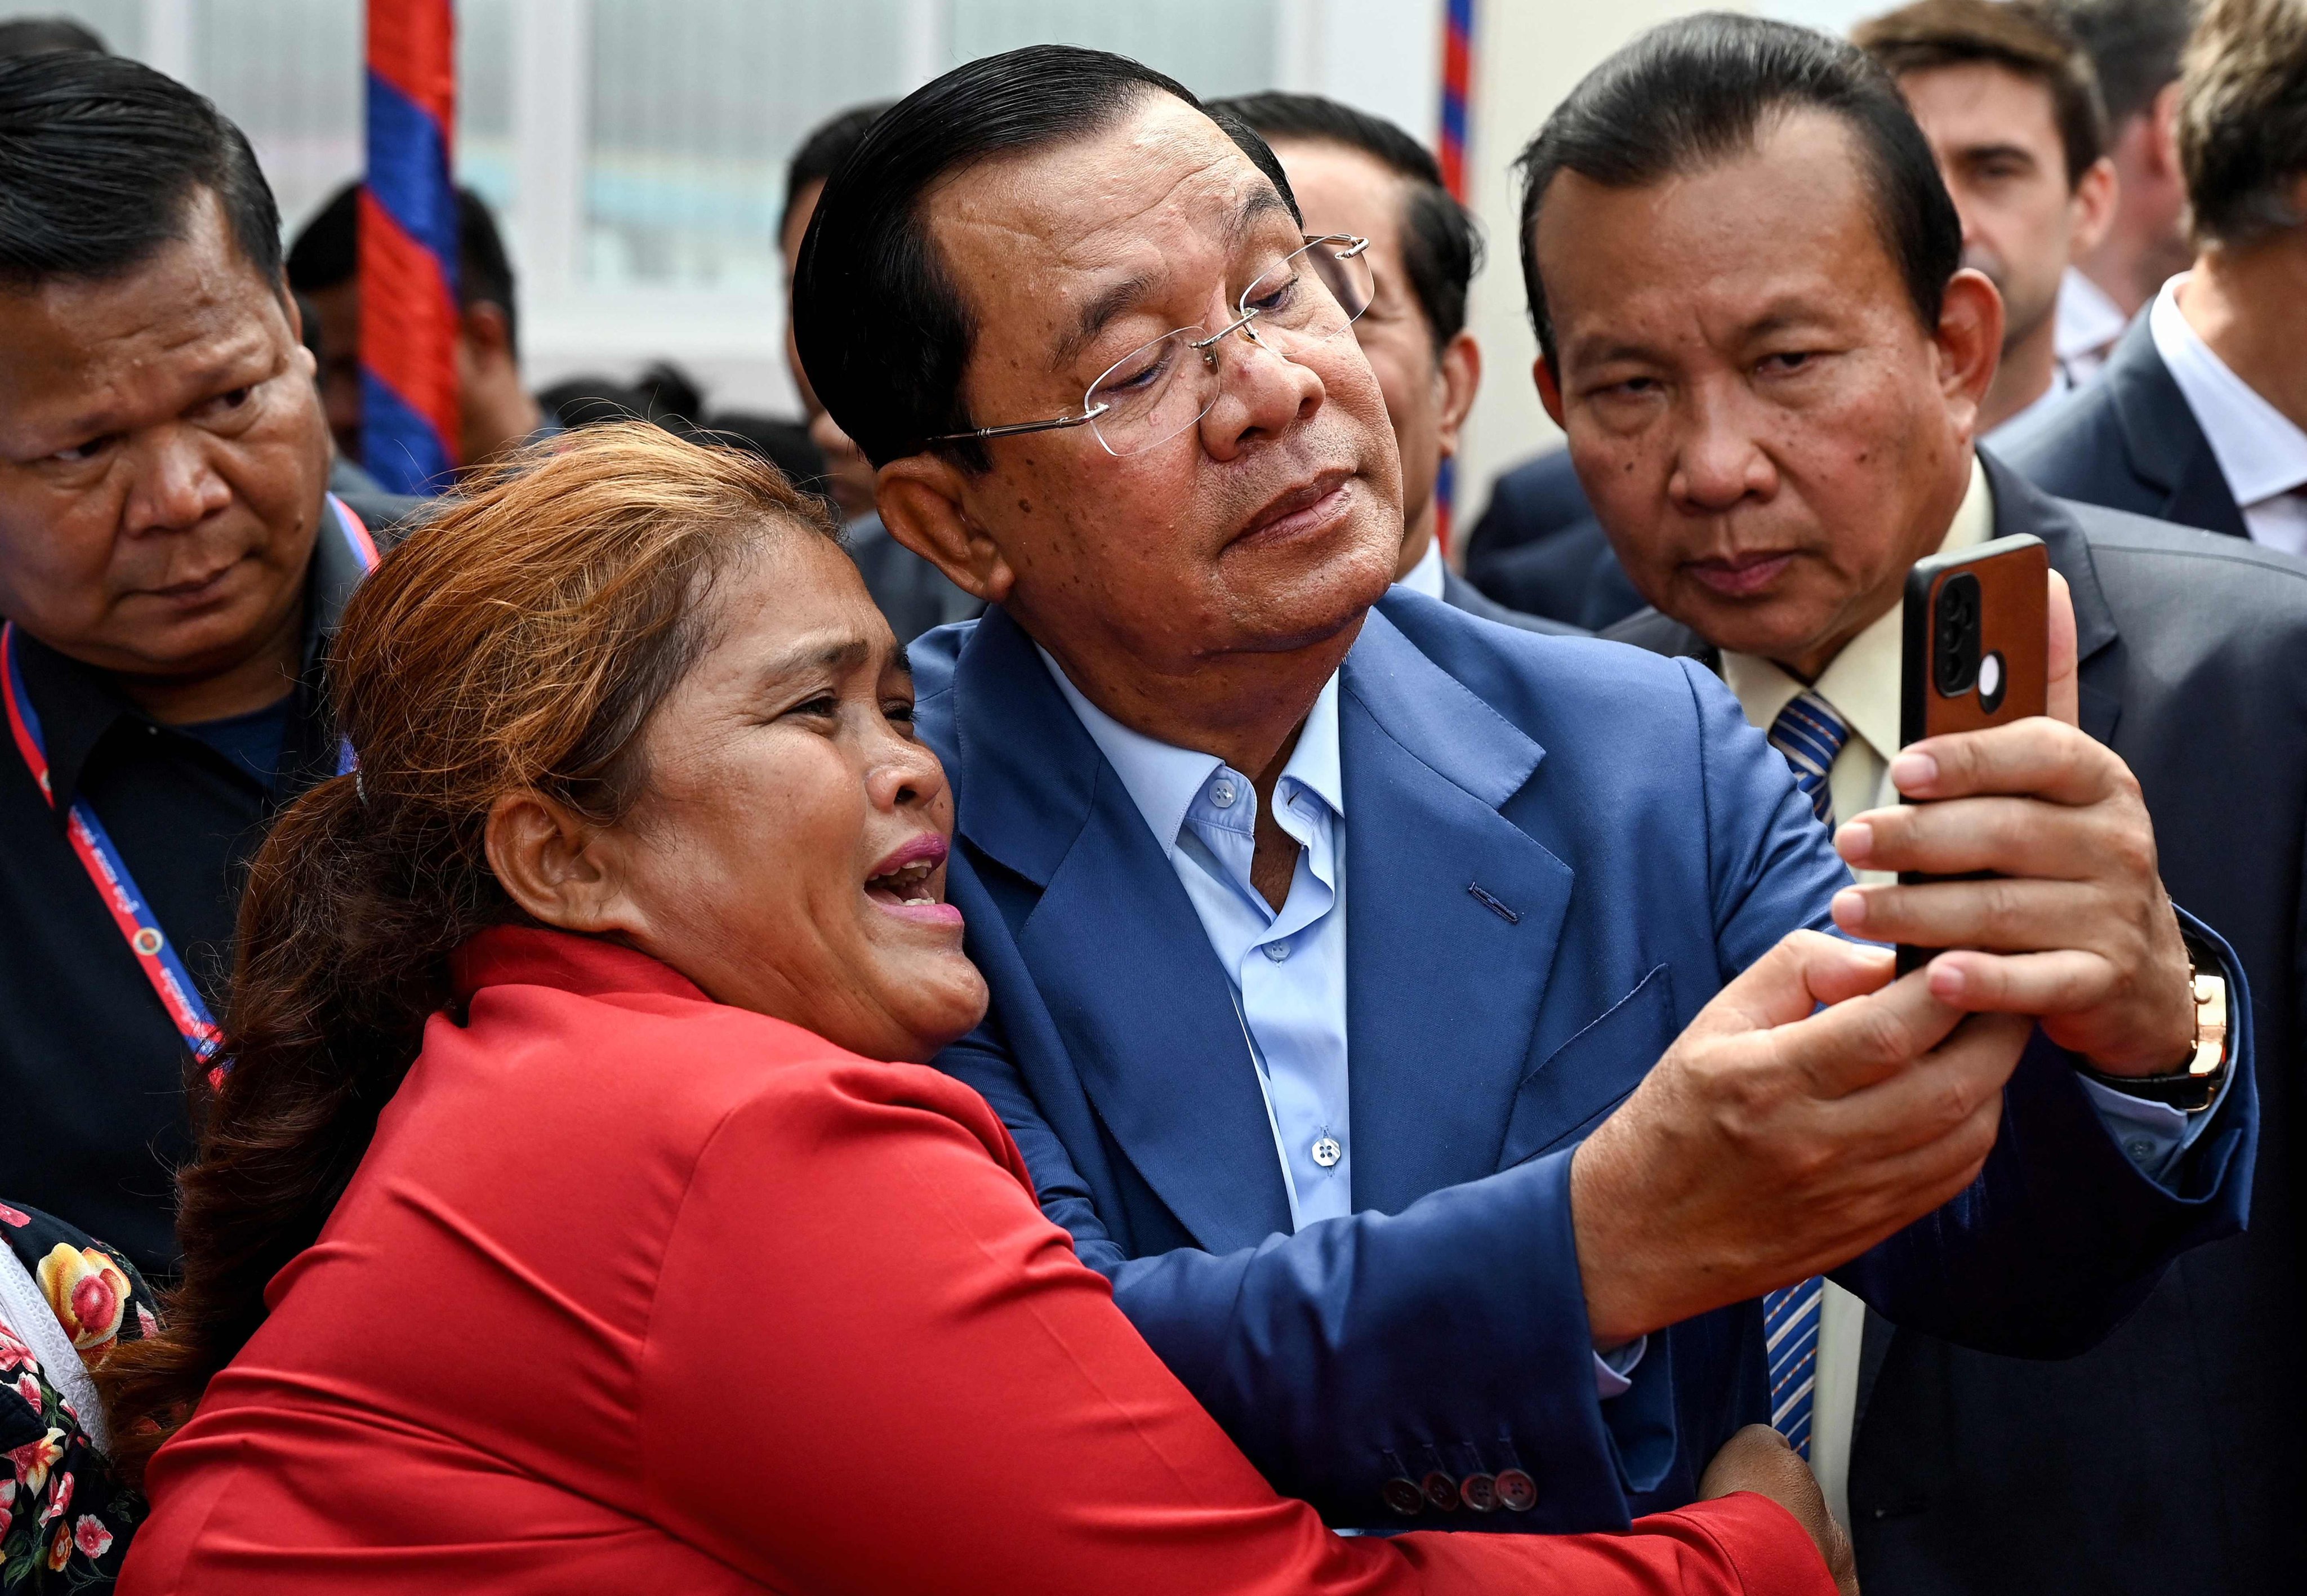 Cambodia’s Prime Minister Hun Sen takes a selfie with a supporter in Phnom Penh on June 19. Photo: AFP